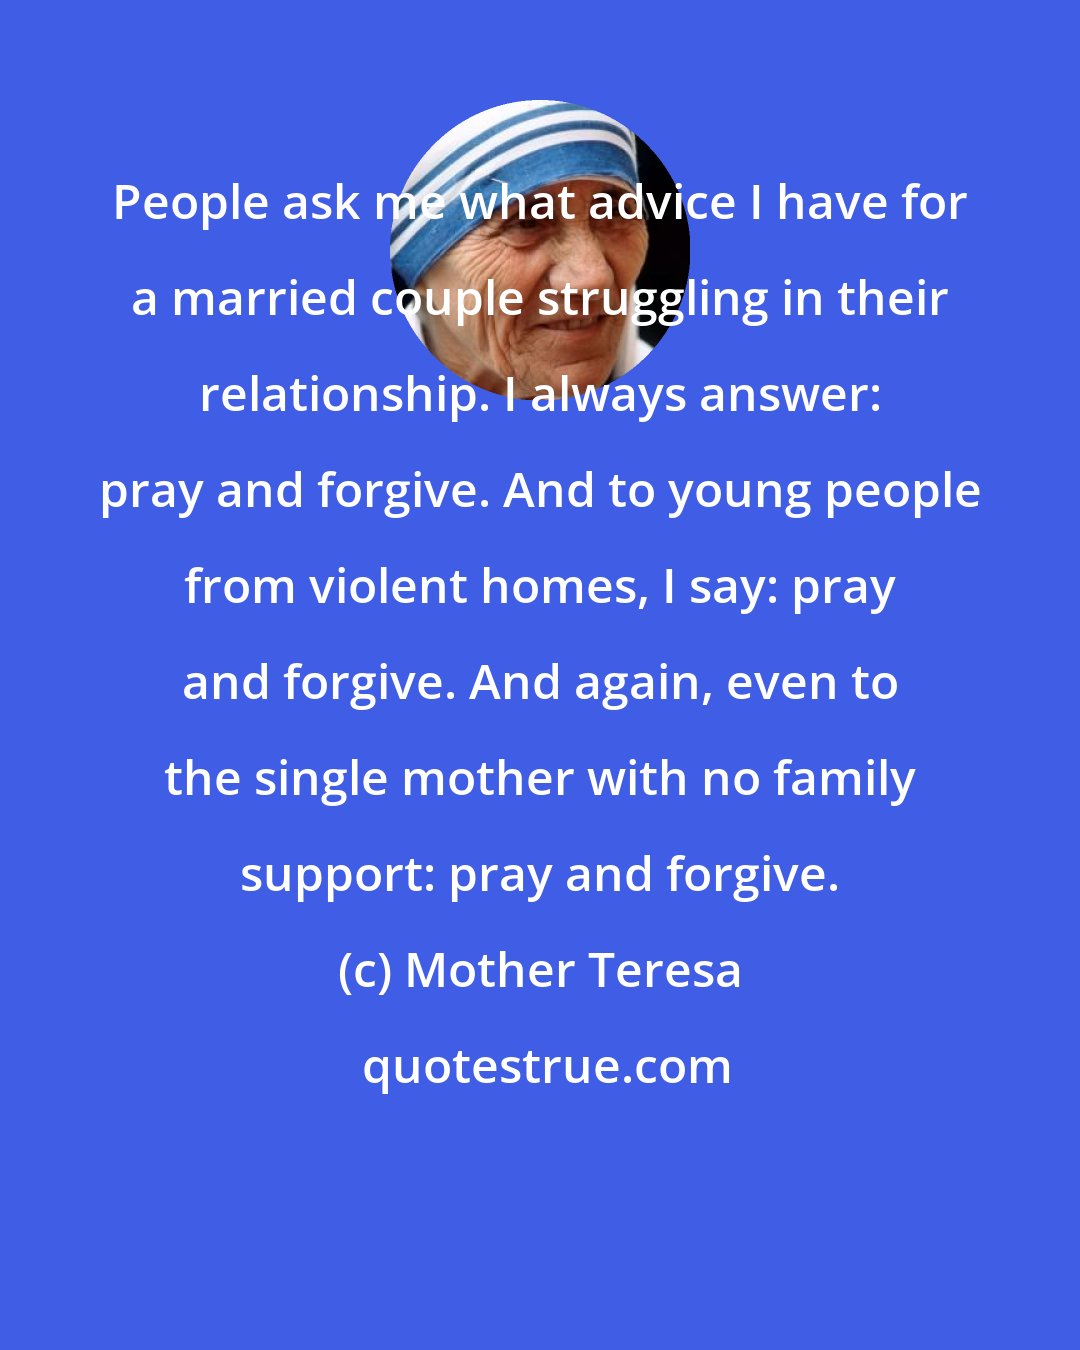 Mother Teresa: People ask me what advice I have for a married couple struggling in their relationship. I always answer: pray and forgive. And to young people from violent homes, I say: pray and forgive. And again, even to the single mother with no family support: pray and forgive.